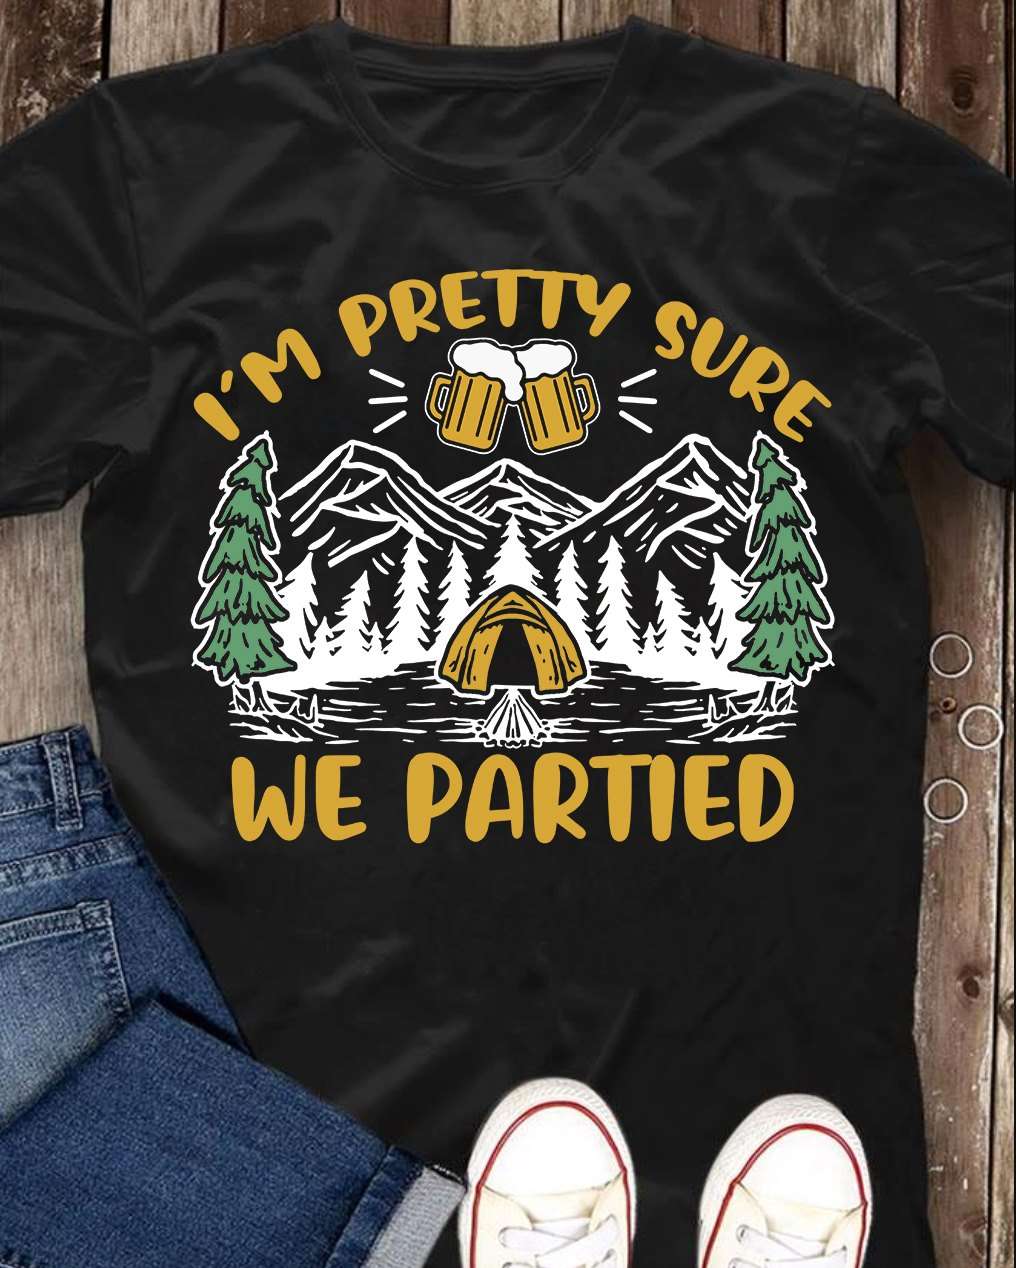 I'm pretty sure we partied - Drinking and camping, party while camping